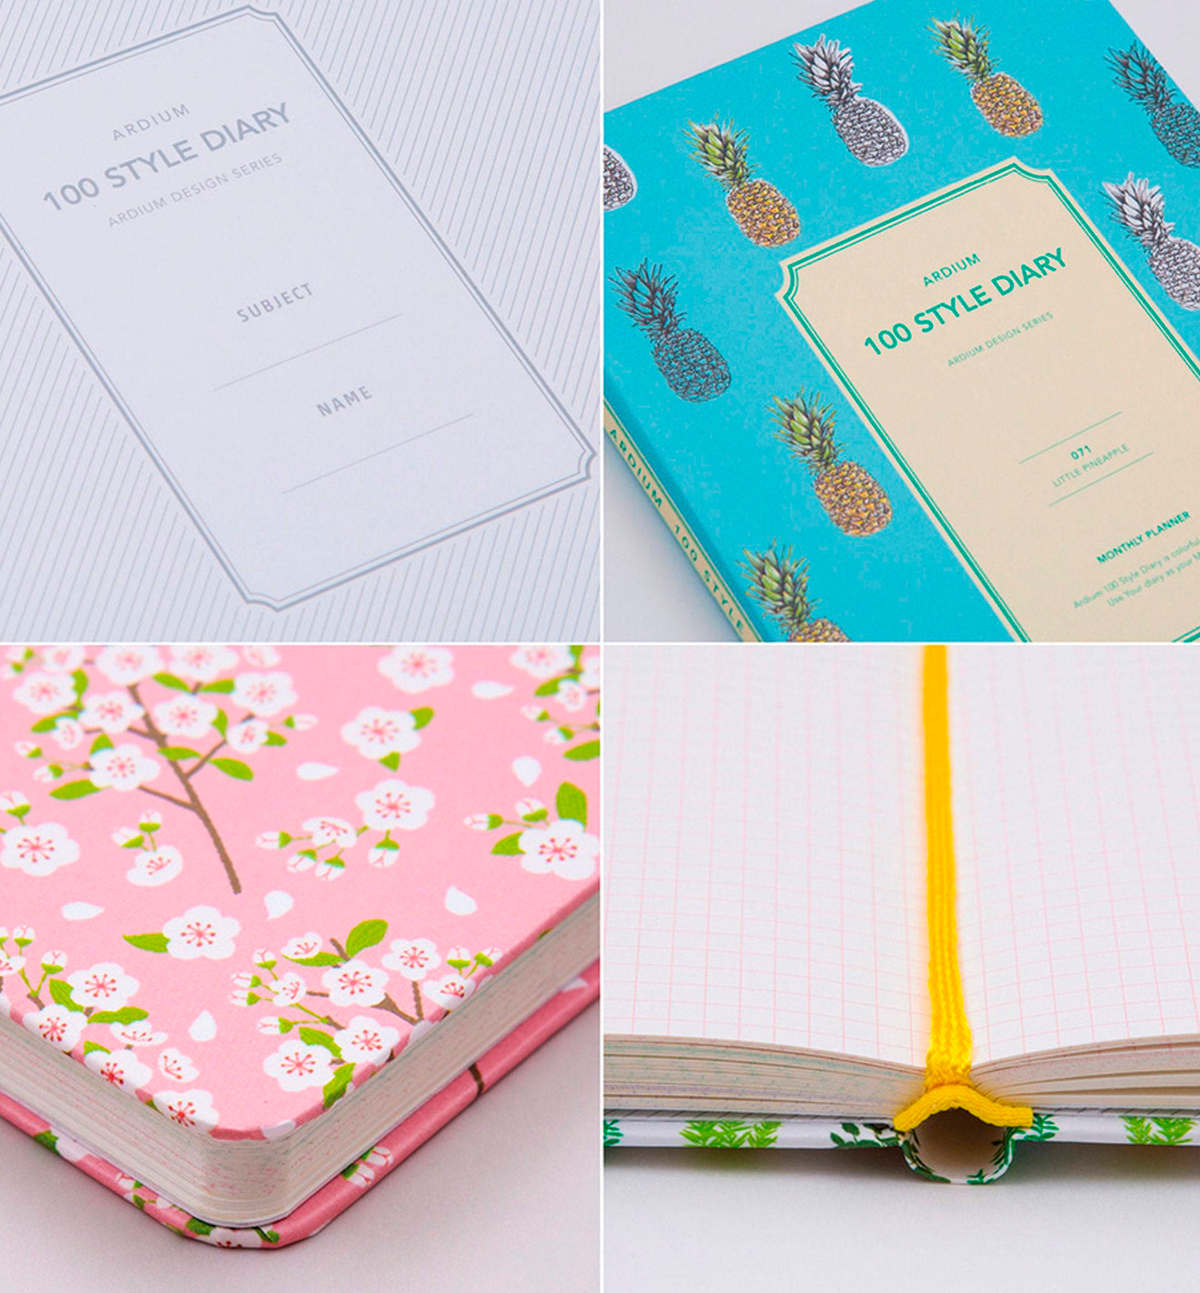 100 Style Diary [Mint Cherry Blossom]